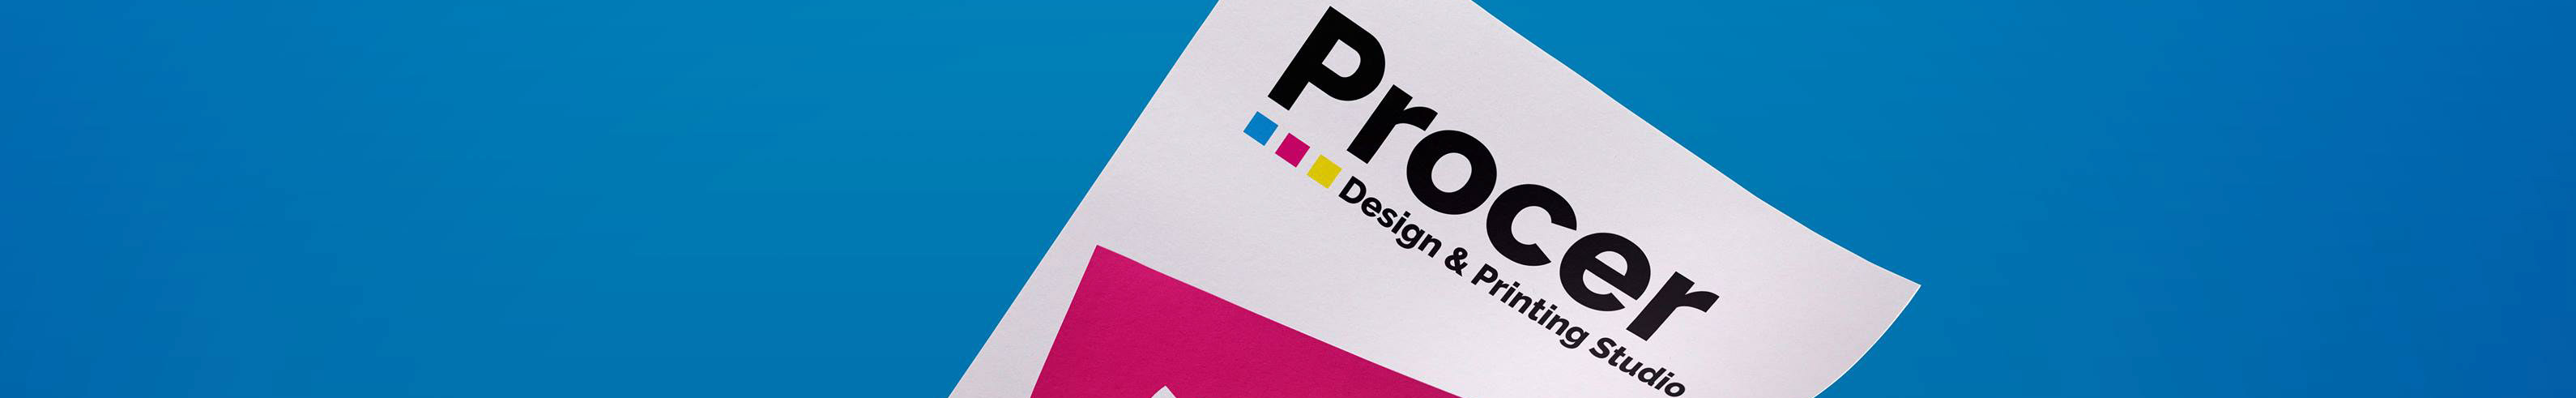 Procer Integrated Communication's profile banner